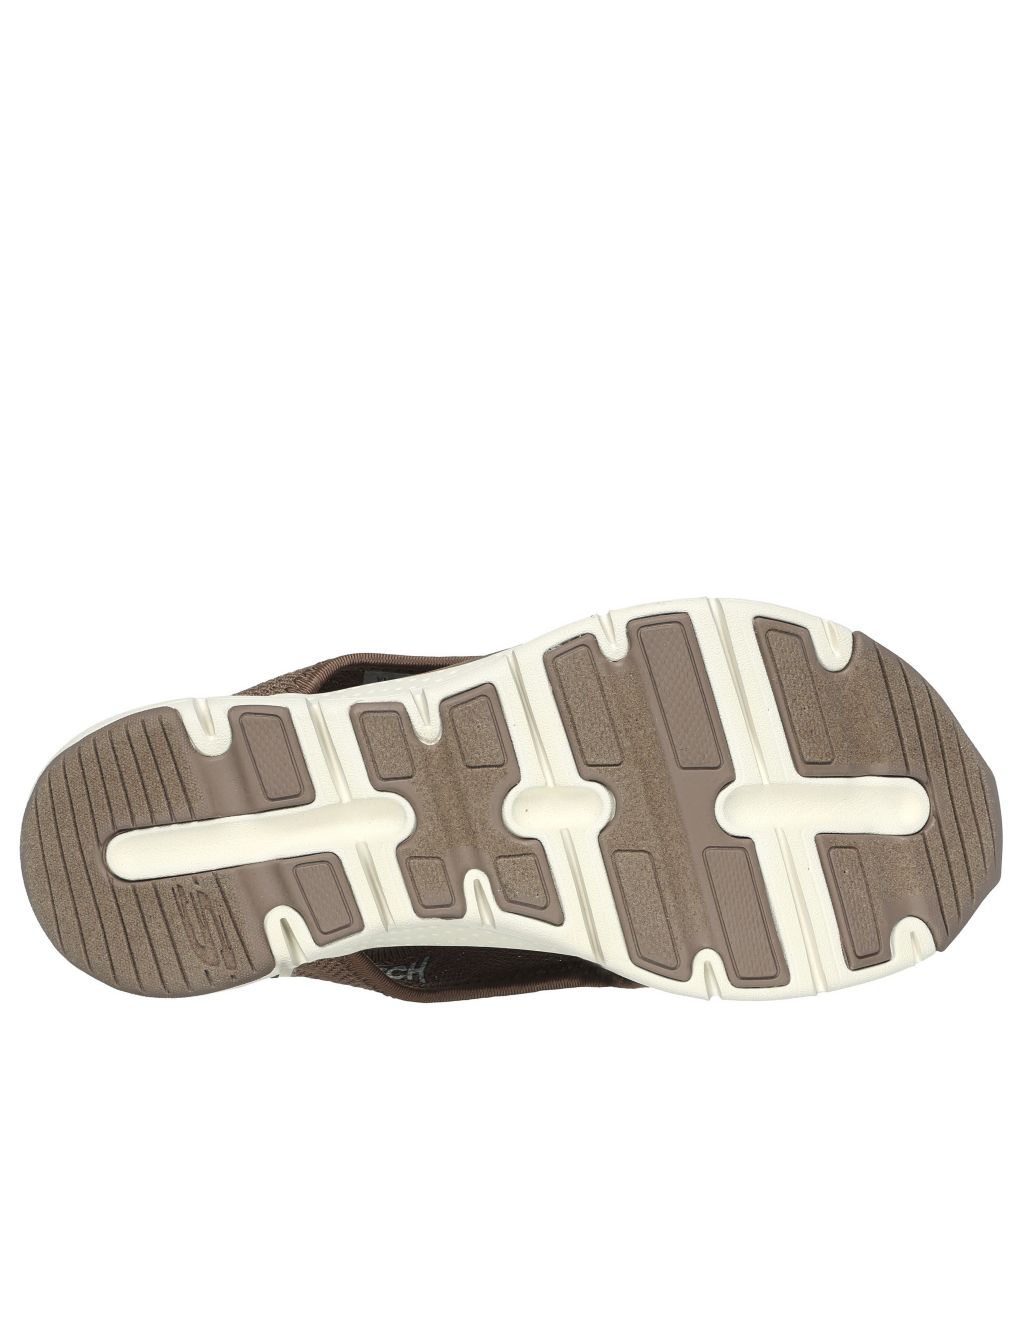 Arch Fit Darling Days Sandals image 4